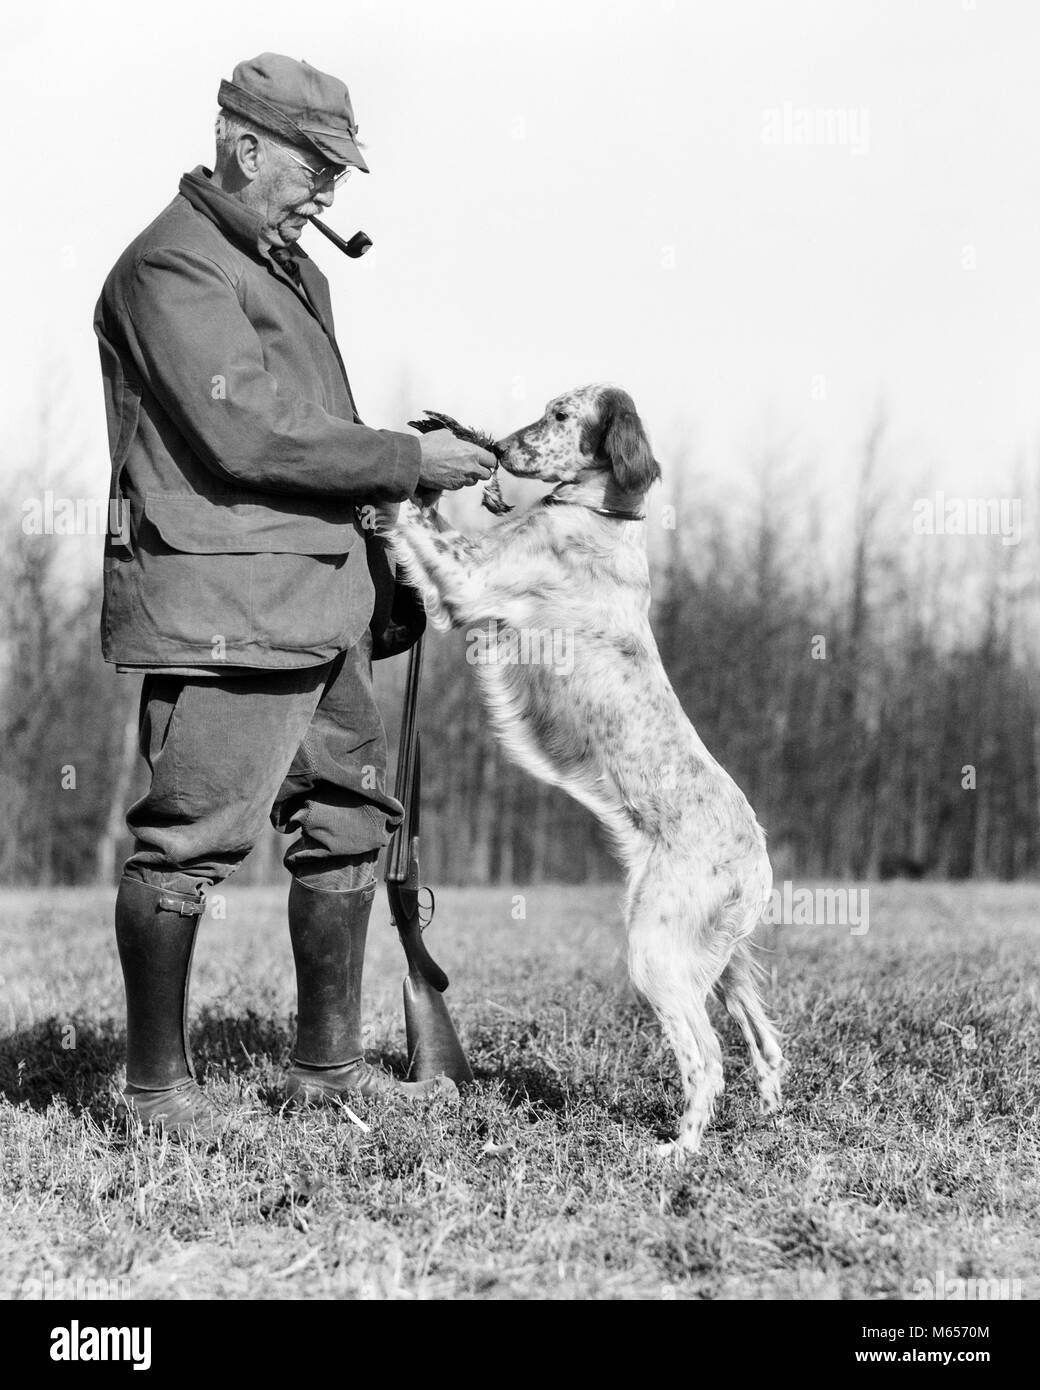 1920s SENIOR MAN HUNTER WITH SHOTGUN LETTING ENGLISH SETTER DOG SMELL BIRD - g530 HAR001 HARS SENIOR ADULT NOSTALGIA TOGETHERNESS 60-65 YEARS ONE ANIMAL MAMMALS OLDSTERS OLDSTER TOBACCO CANINES RECREATION LETTING ELDERS 70s ADULT COOPERATION UPLAND CANINE GUNNING MALES MAMMAL RETRIEVING SETTER B&W BLACK AND WHITE CAUCASIAN ETHNICITY DOUBLE BARREL OLD FASHIONED PERSONS Stock Photo